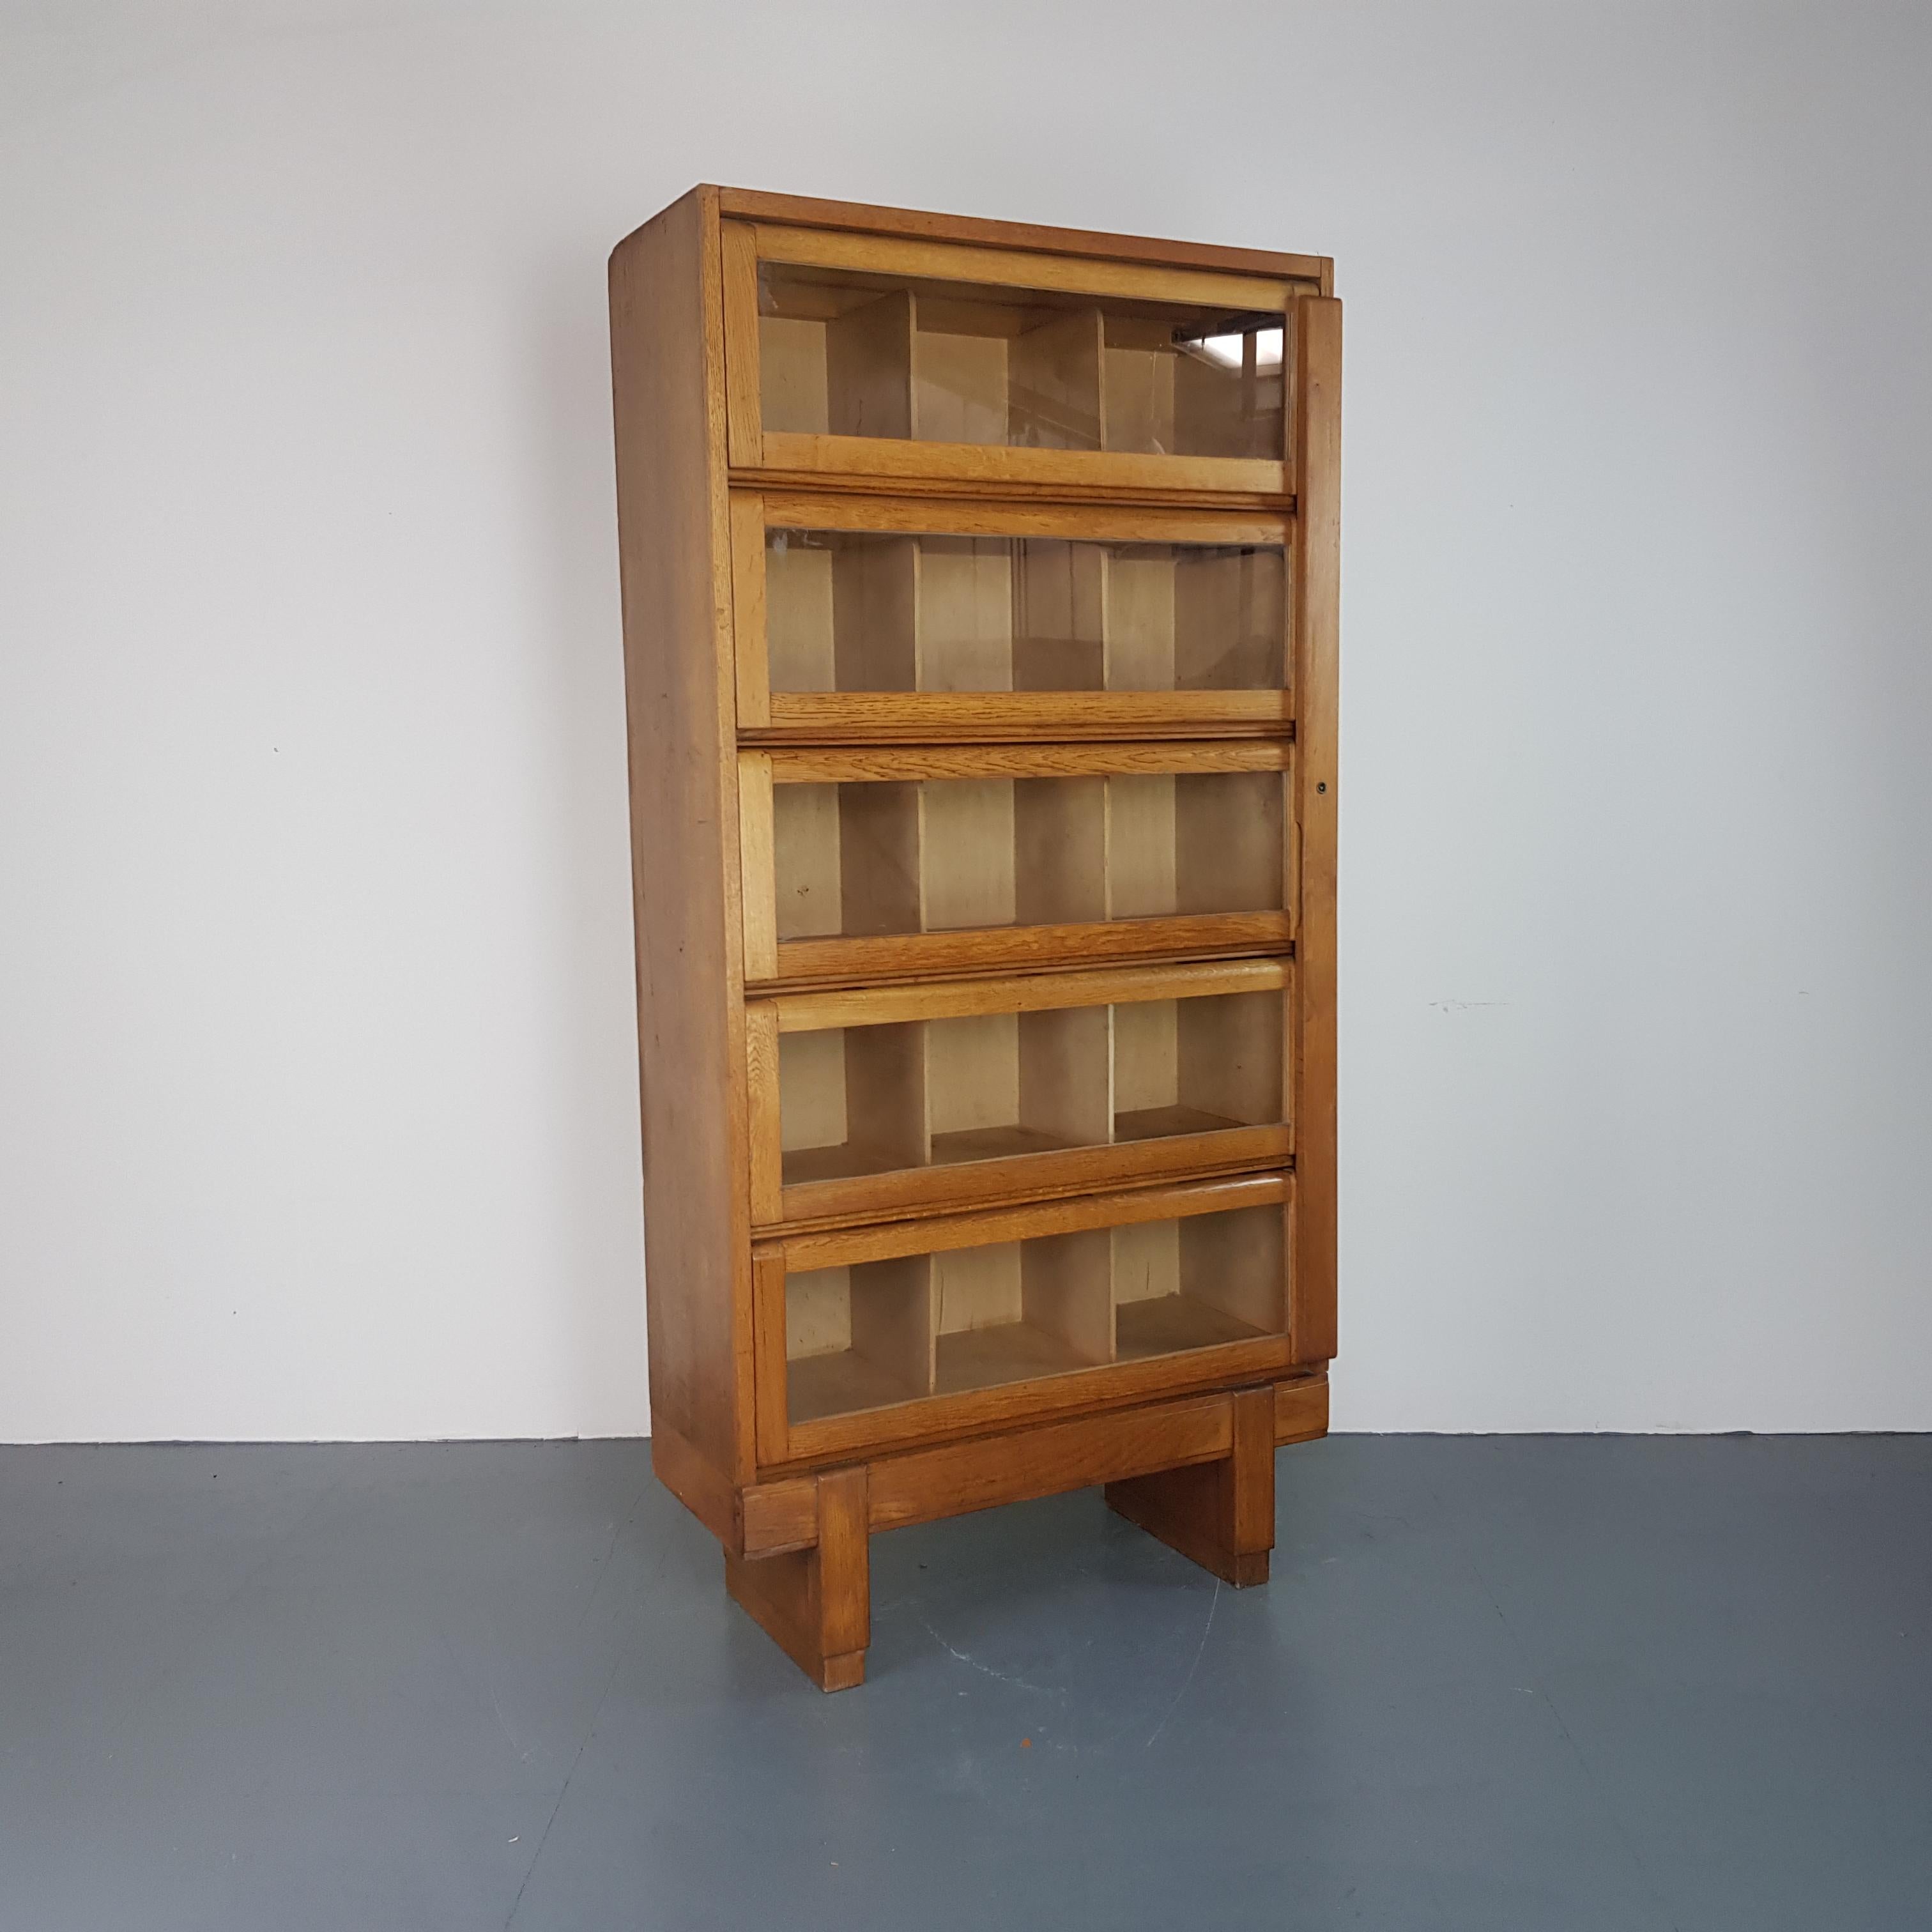 Wonderful vintage bookcase designed and made in the UK by Staverton (Dartington, South Devon). In the middle of the last century, Staverton manufactured furniture ranges for the Crown Suppliers and this developed into contracts for Crown Court